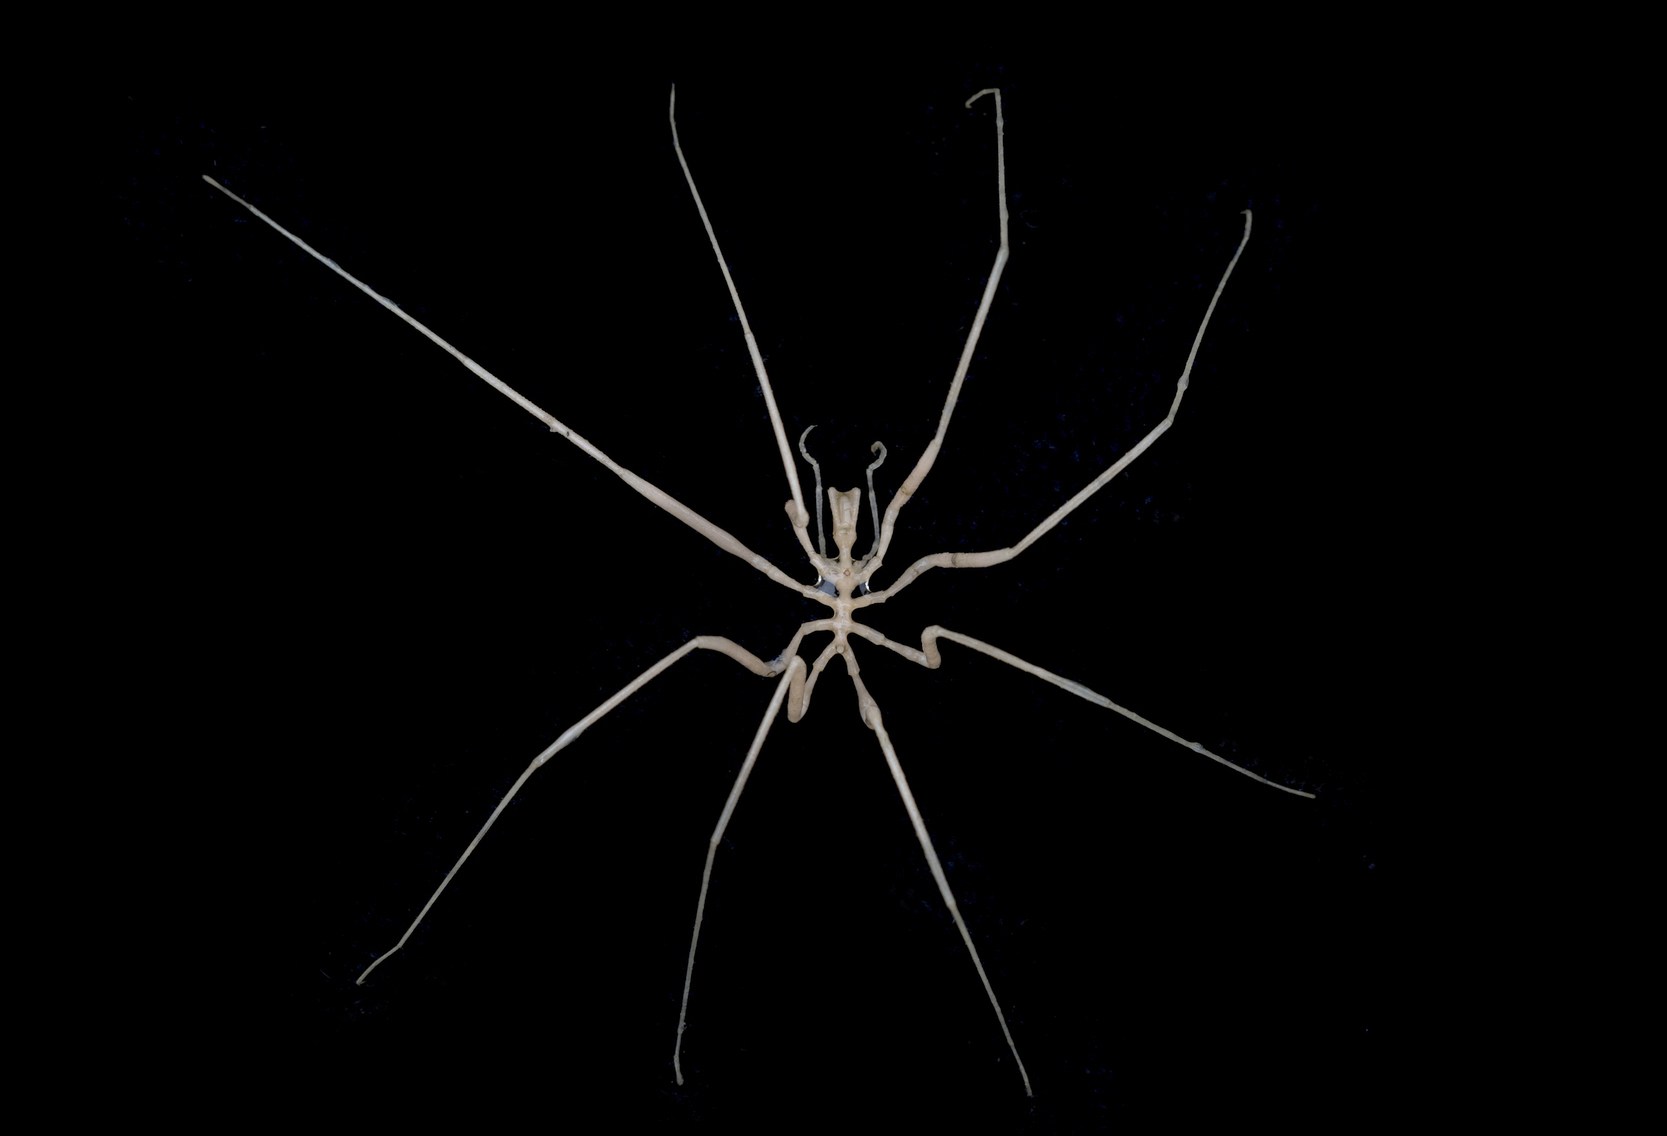 A sea spider with a tiny body and long, pale legs on a black background